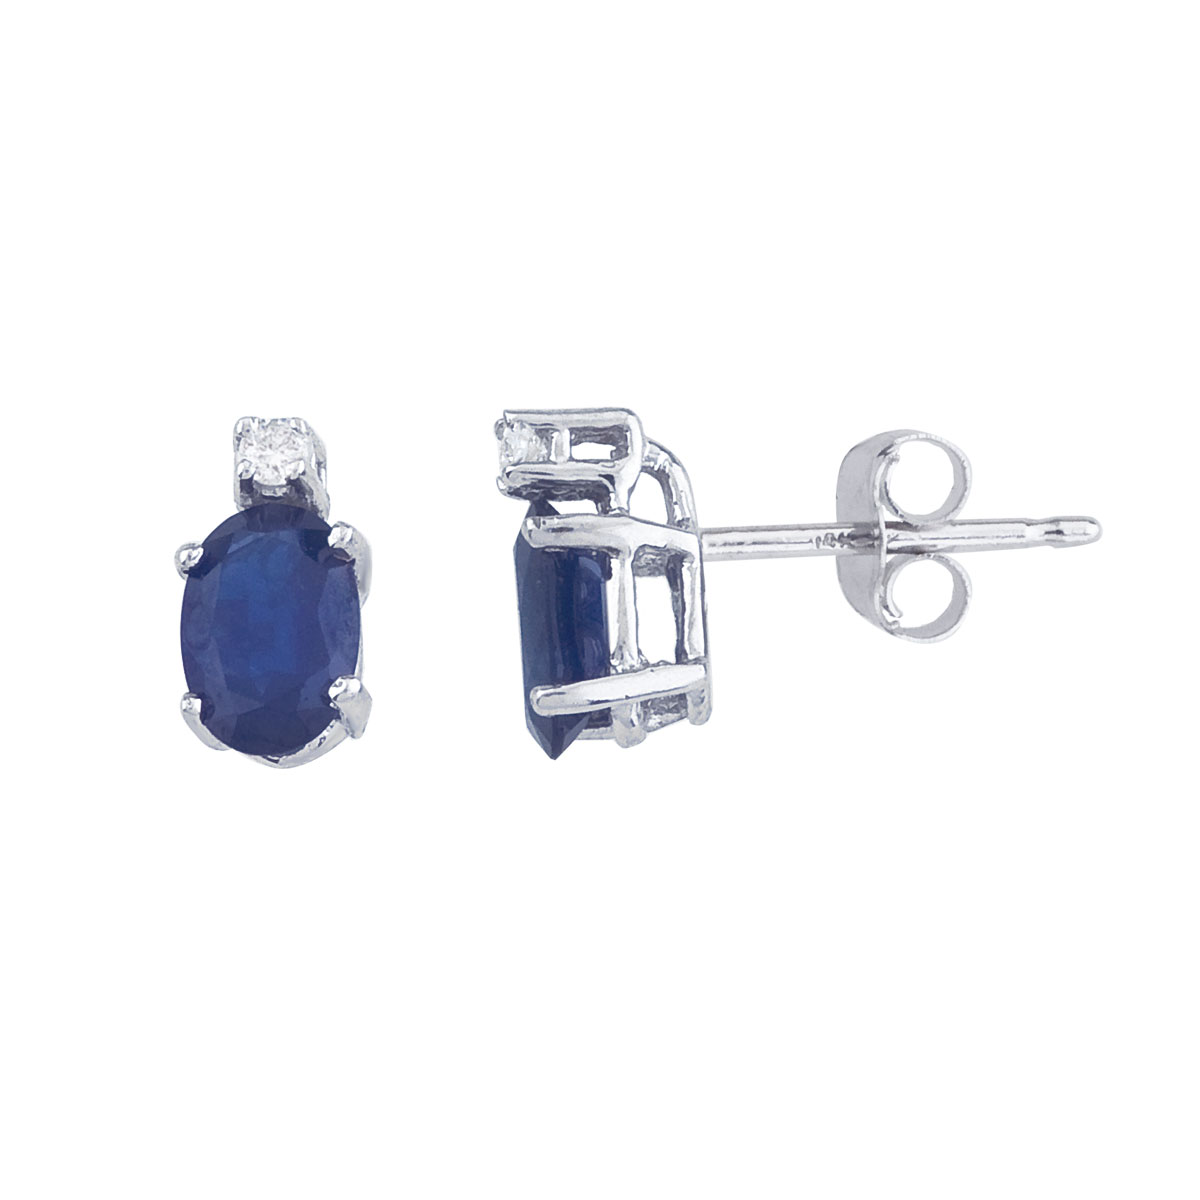 JCX2319: These 6x4 mm oval sapphire earrings are set in beautiful 14k white gold and feature .04 total carat diamonds.